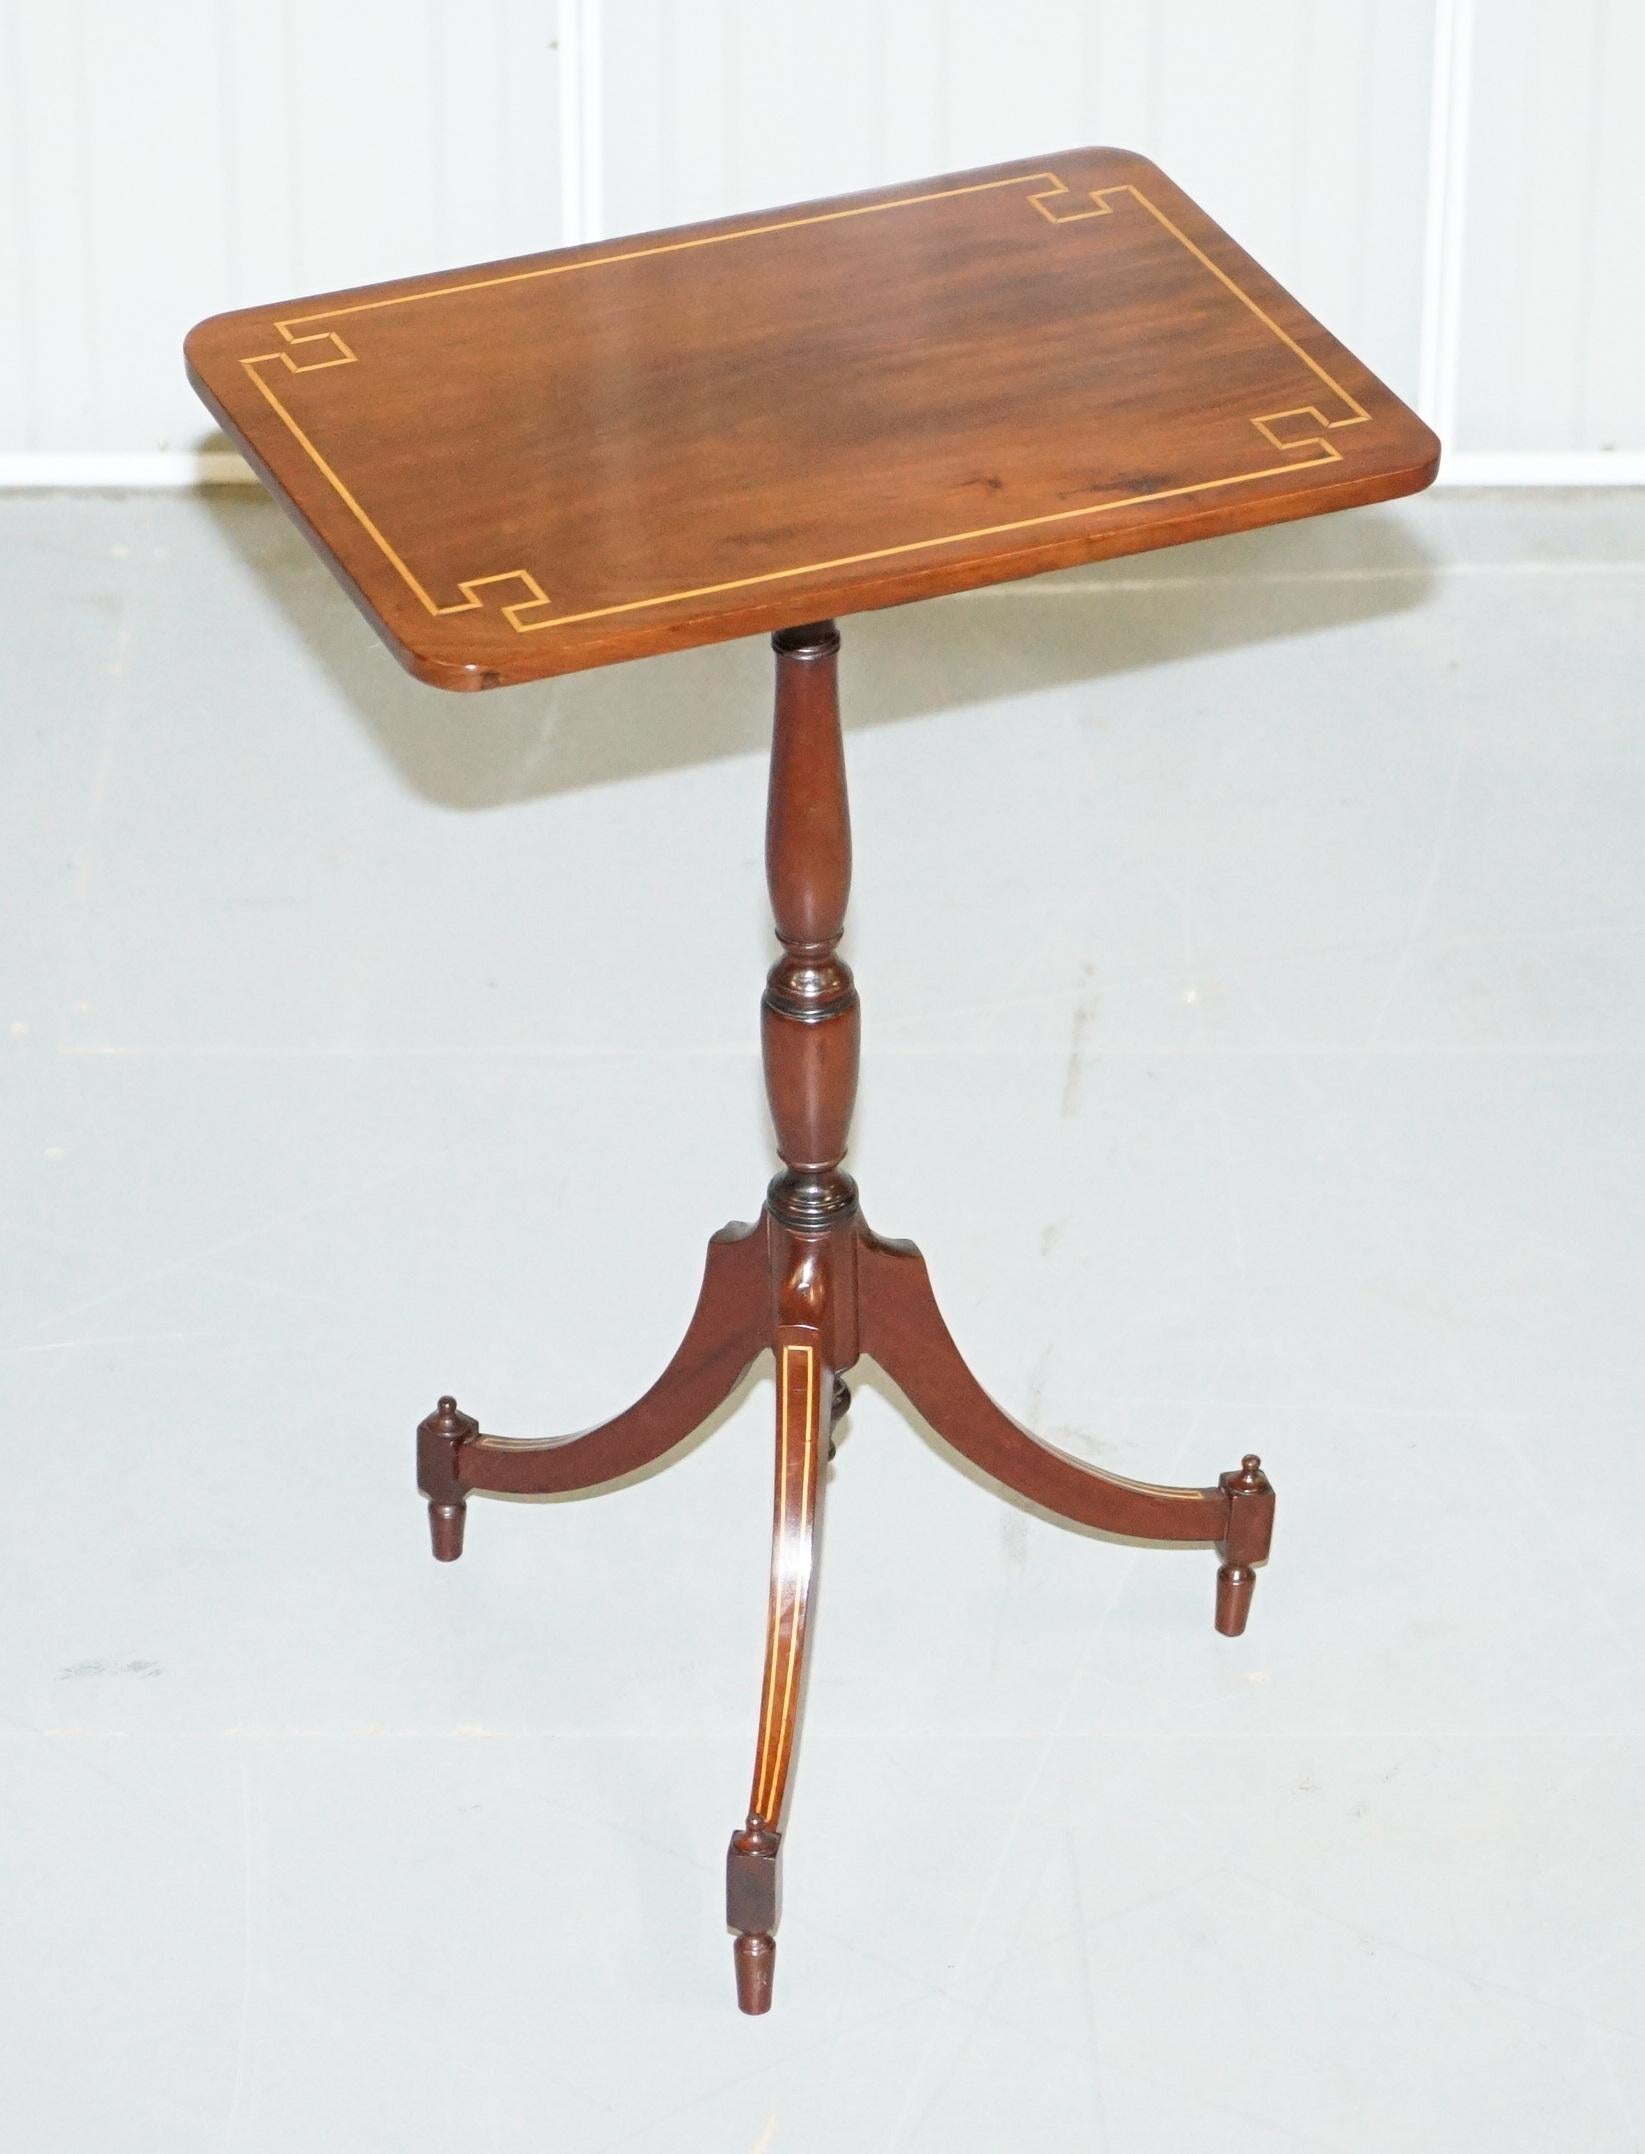 We are delighted to offer for sale this stunning pair of flamed walnut with box wood inlay lamp side tables

They are a very good looking well made and decorative piece, the tops have rich warm flamed walnut which glows in the right light 

We